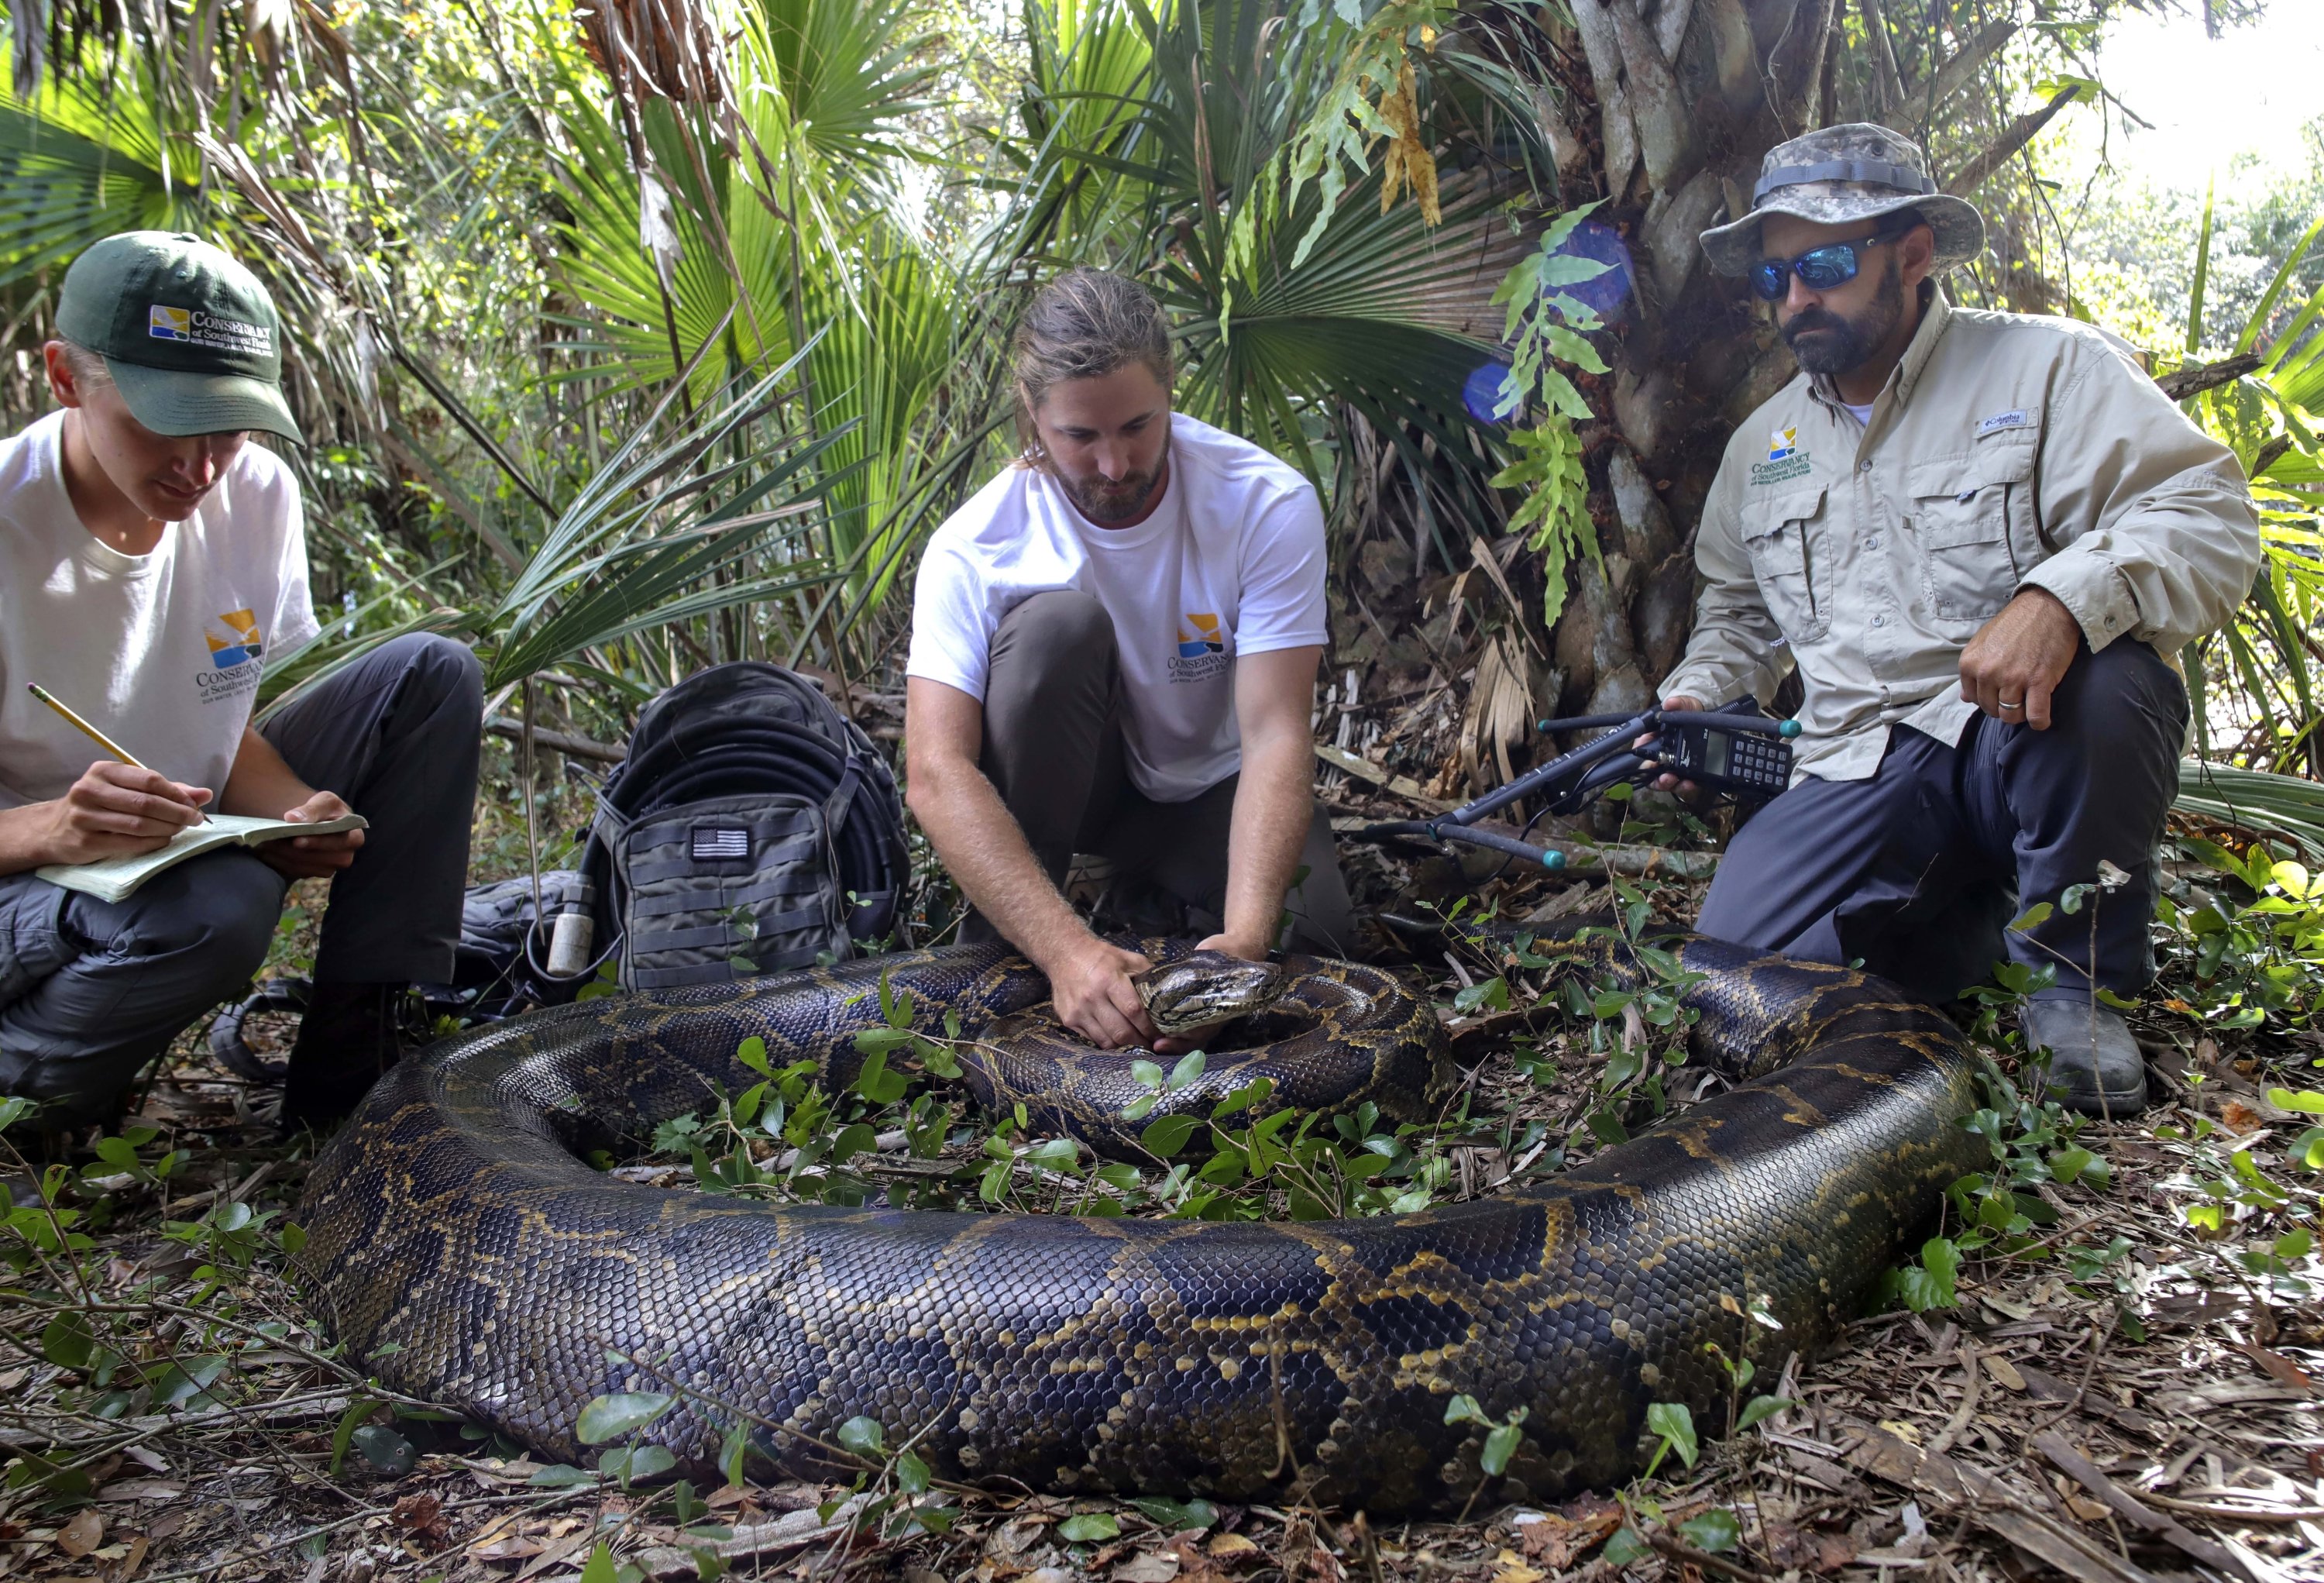 This photo provided by the Conservancy of Southwest Florida shows biologists Ian Bartoszek (L) and Ian Easterling (C) with intern Kyle Findley and a 17.7-foot, 215-pound female Burmese python captured by tracking a male scout snake in Florida, U.S., Jan. 12, 2022. (AP Photo)